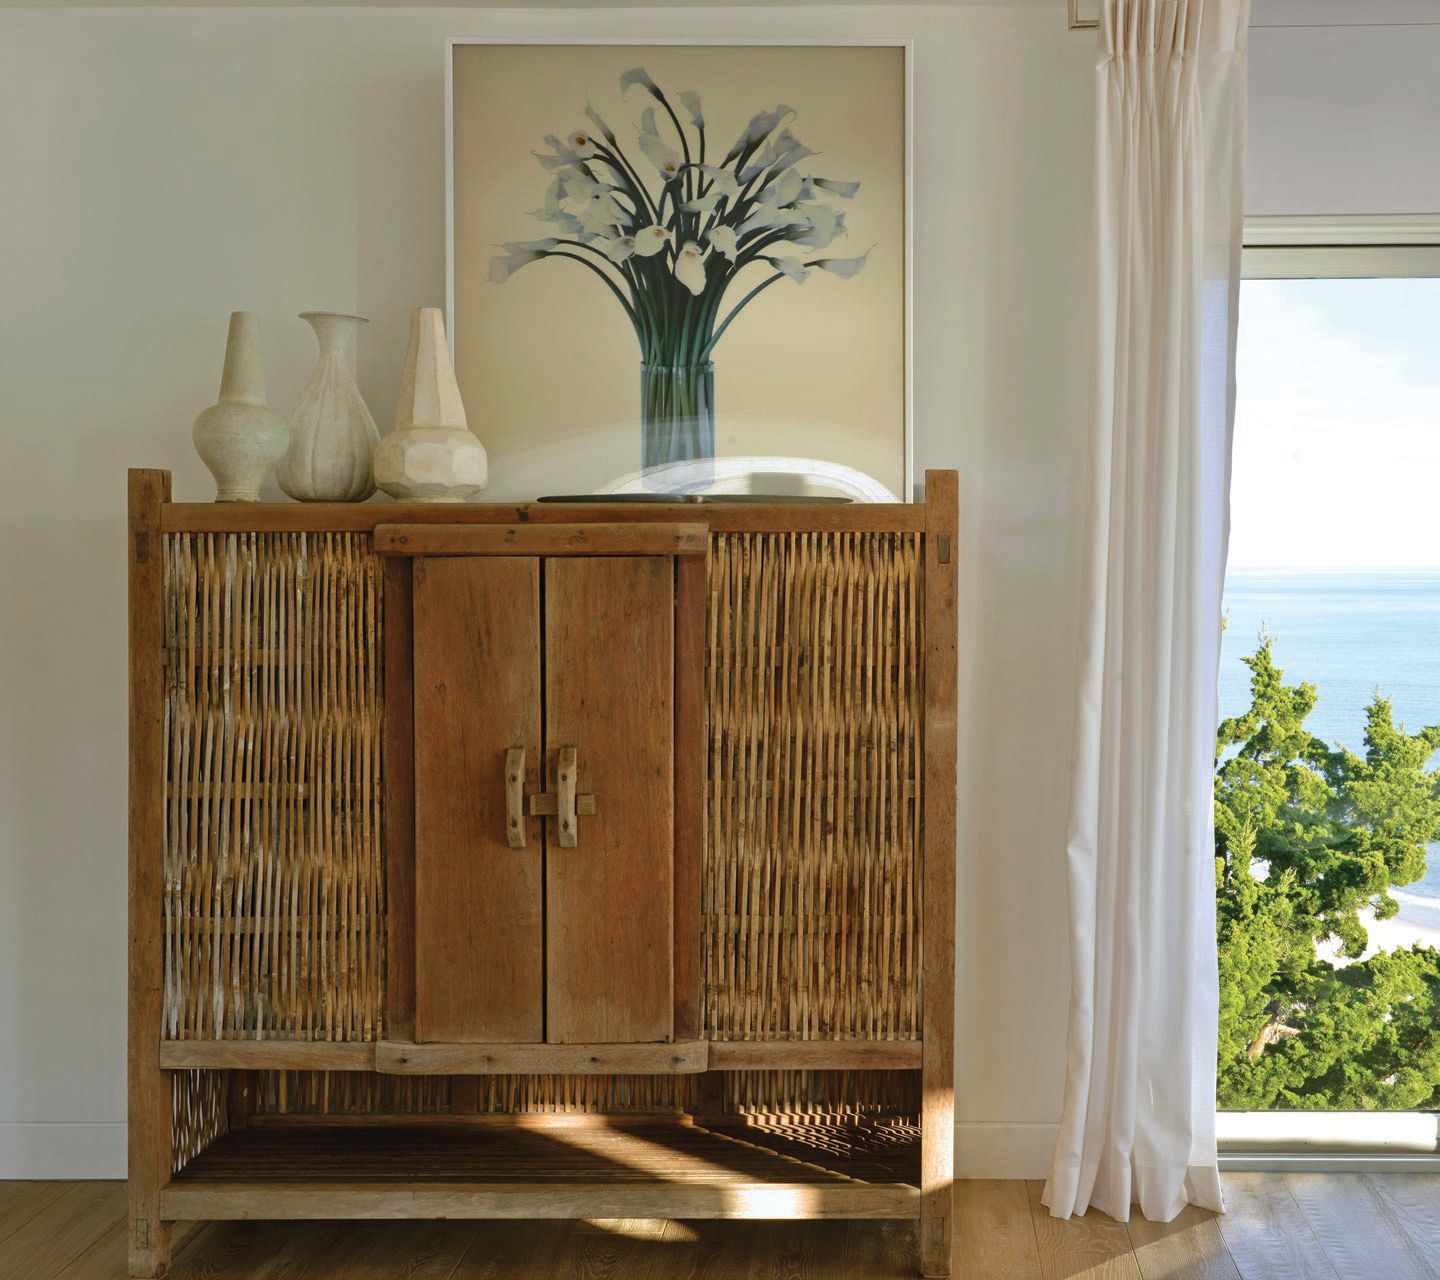 Vicente Wolf’s tranquil Montauk home is informed by natural elements PHOTO COURTESY OF VICENTE WOLF